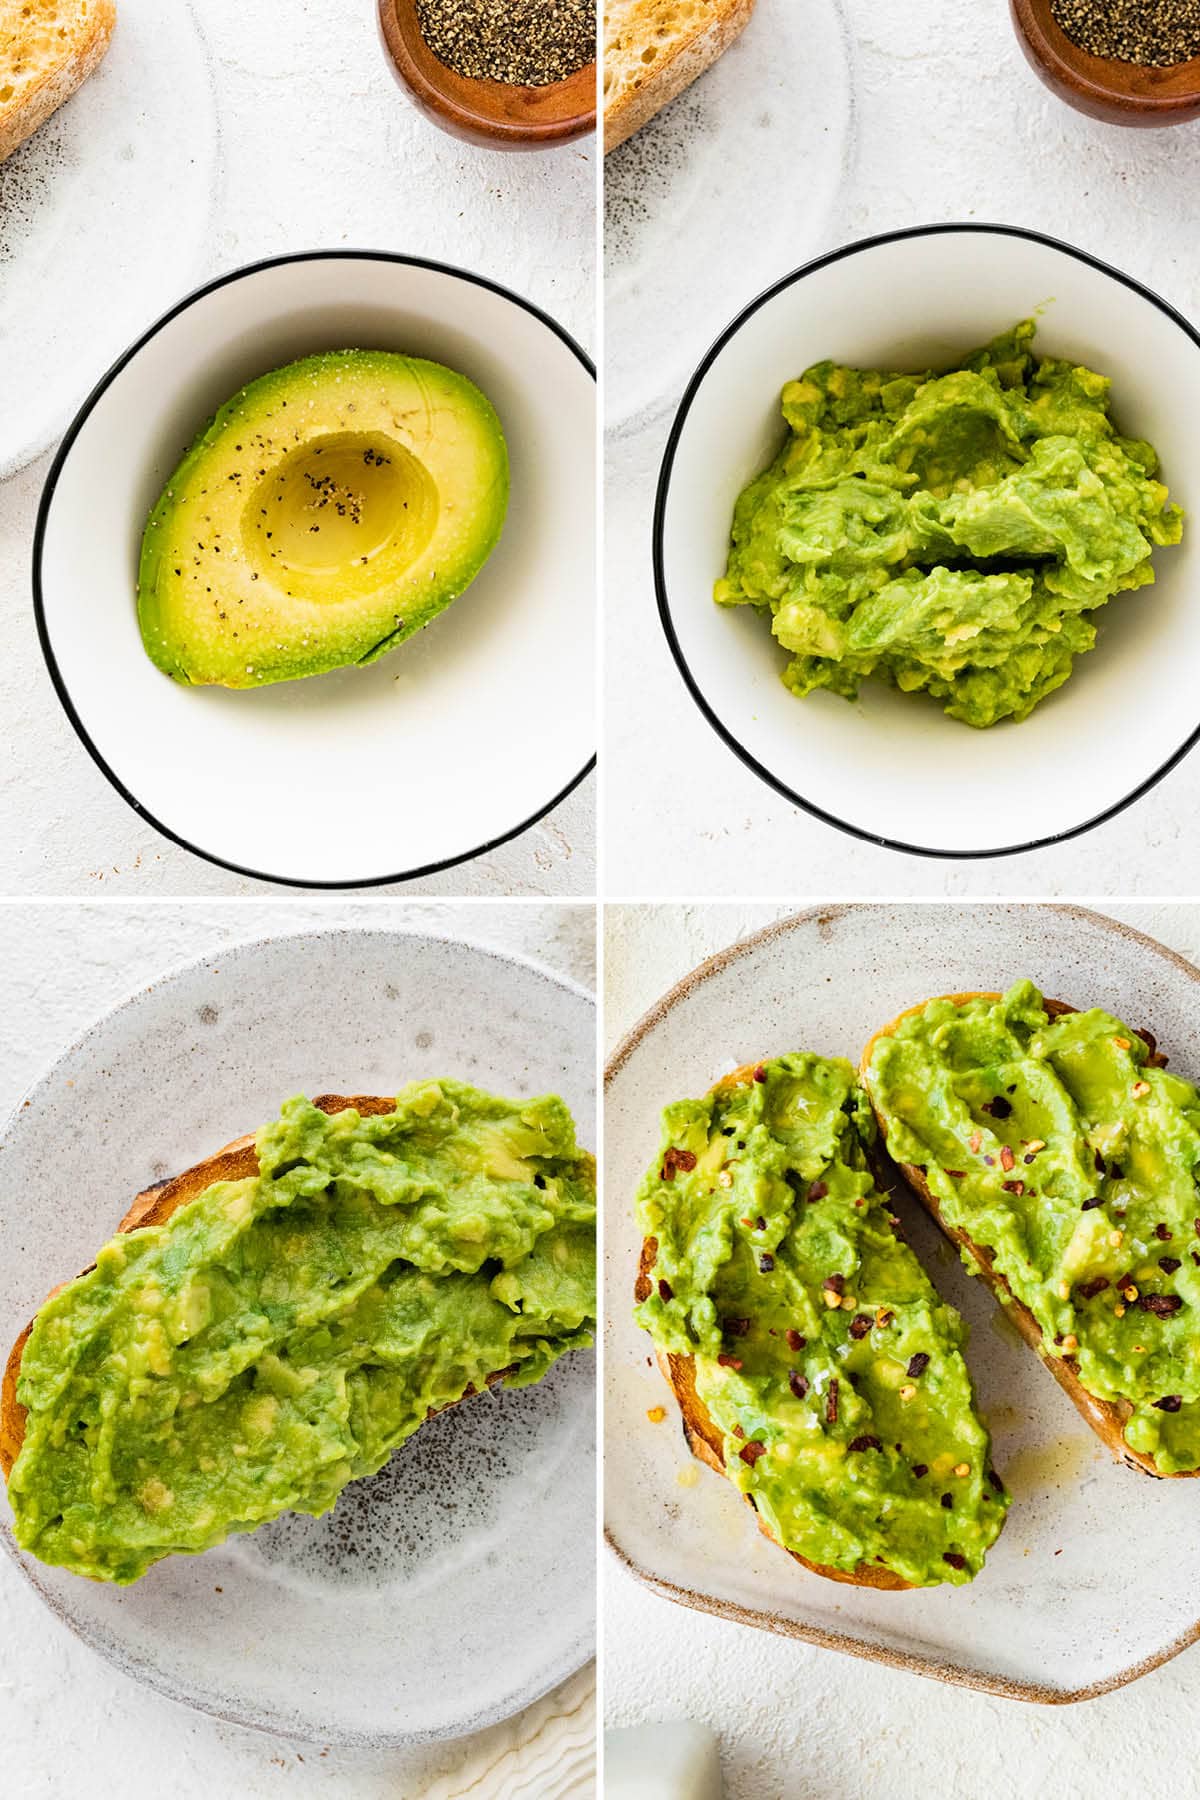 Collage of four photos showing how to make avocado toast: mashing avocado with salt and pepper, spreading onto toast and topping with red pepper flakes.